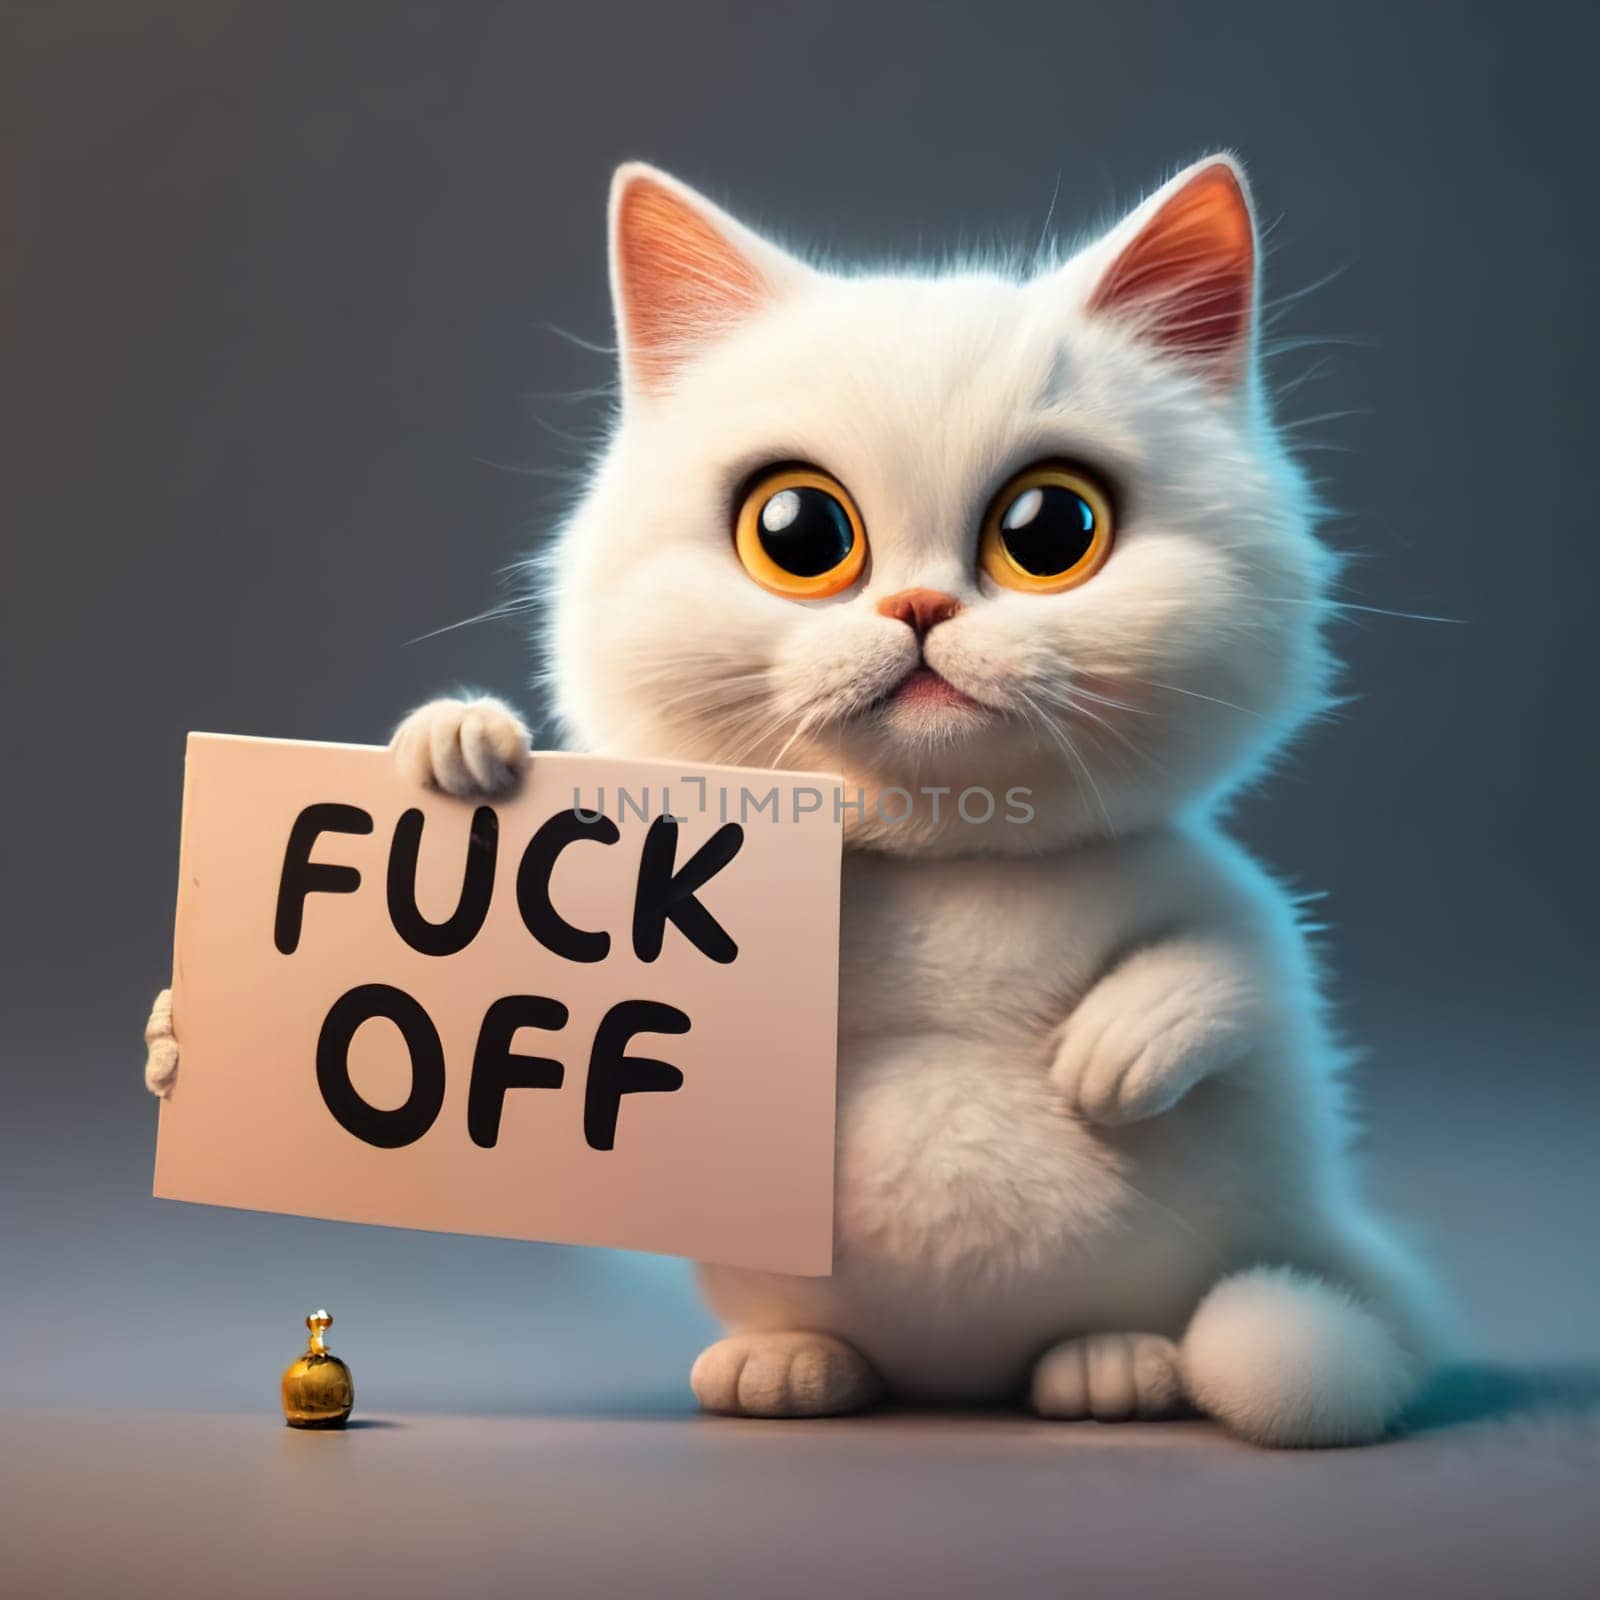 Realistic Cute White Cat in Emoji Style with Various Emotions, Holding a Sign with the Words FUCK OFF - Expressive Pet Illustration download image